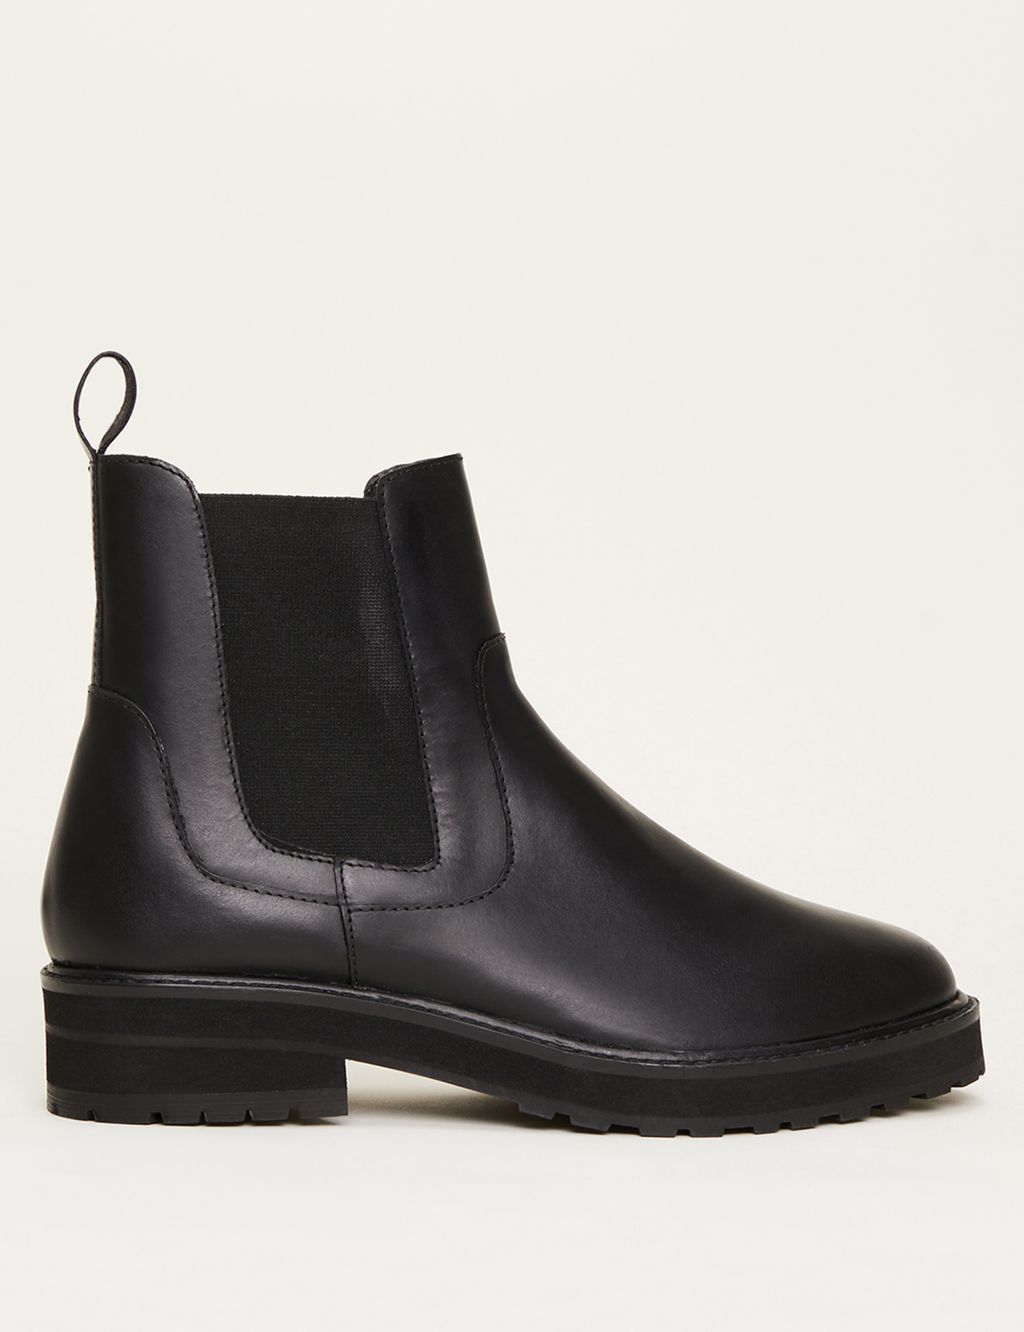 Leather Chelsea Flat Boots image 2